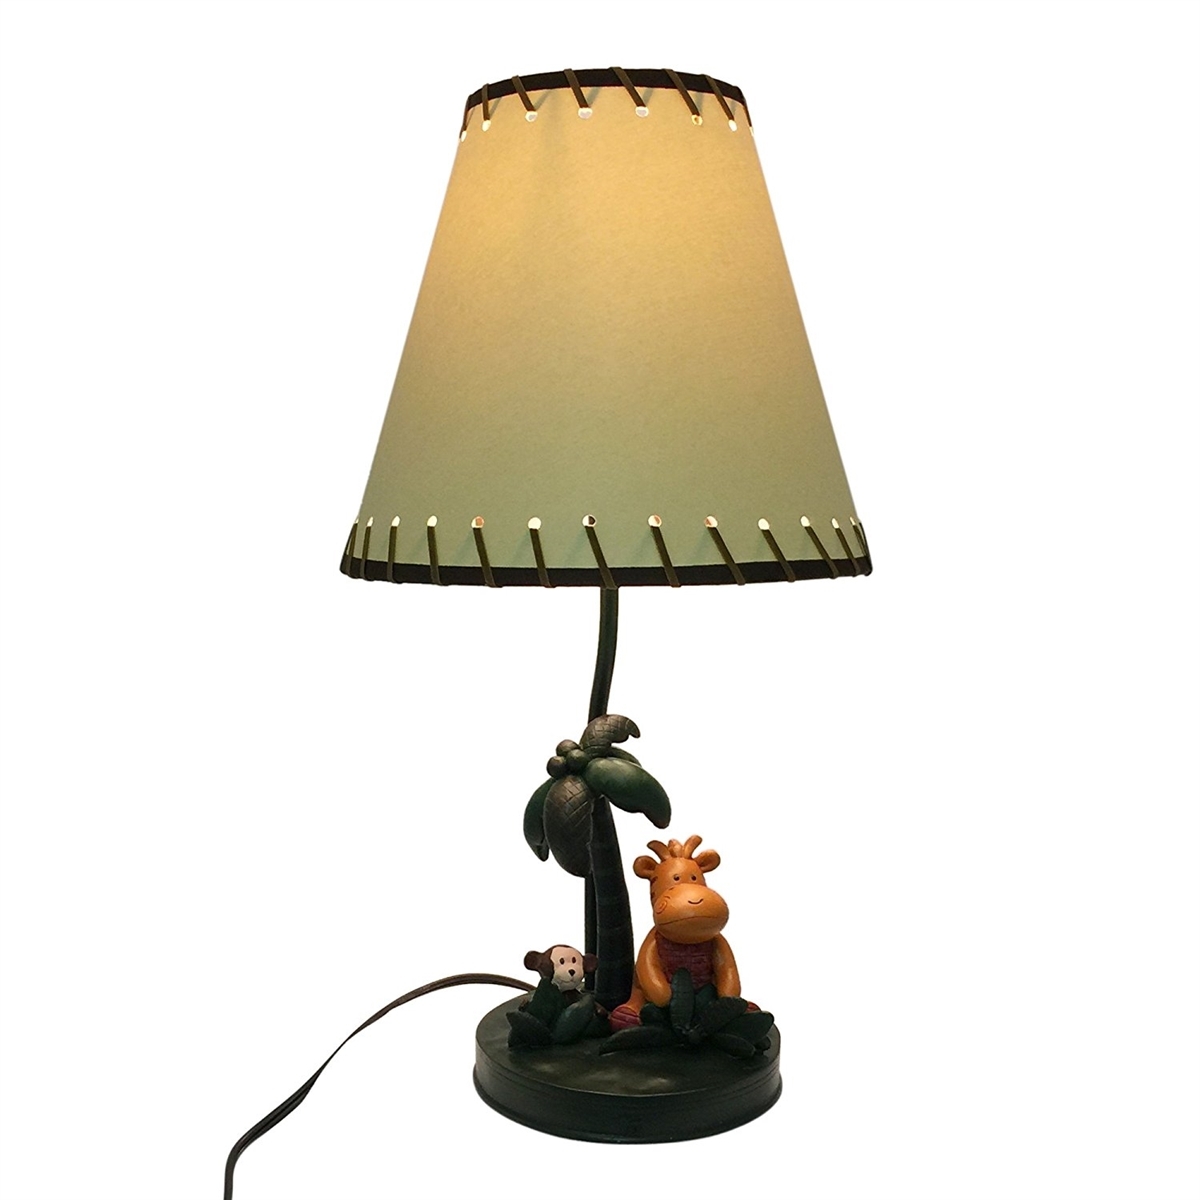 18" H Table Lamp with Empire Shade